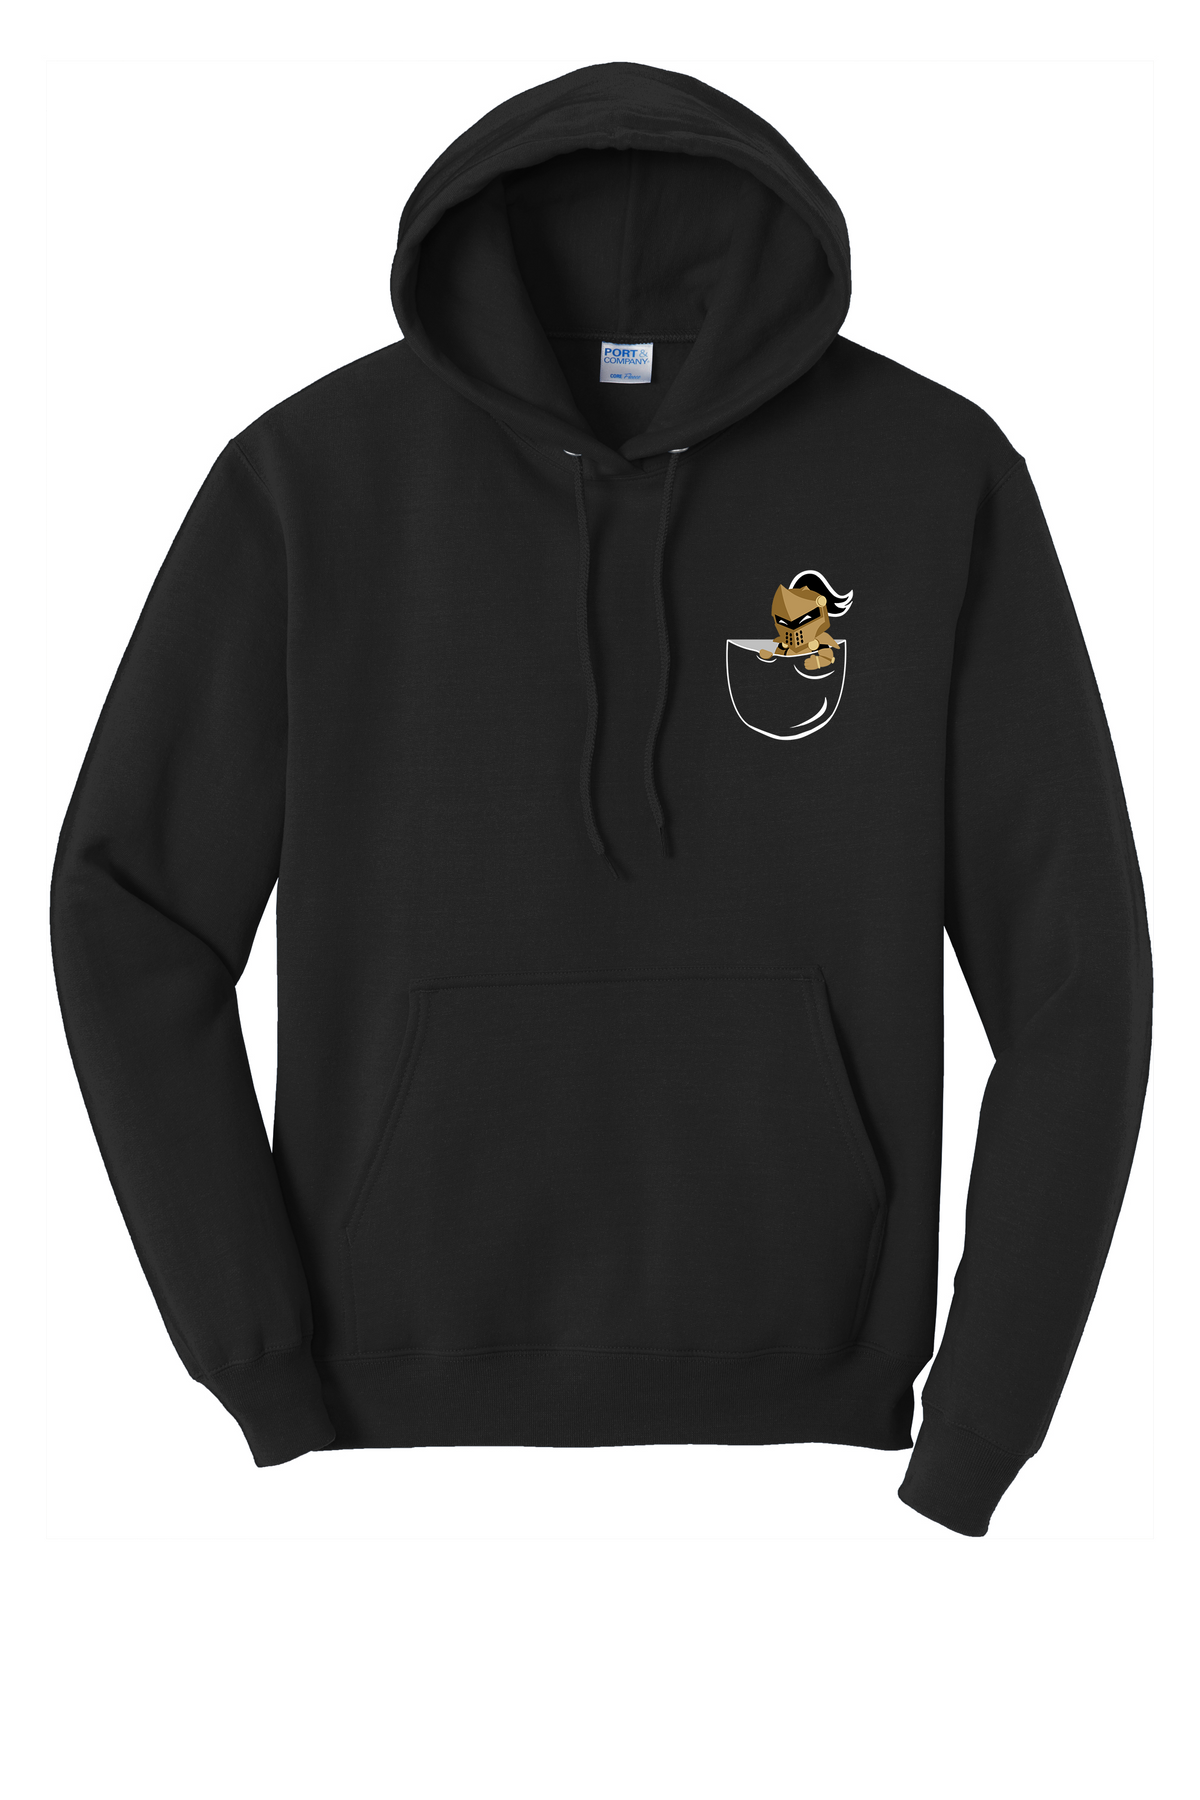 University of Central Florida Esports | Street Series | [DTF] Unisex Tri-Blend Pullover Hoodie #UCF018